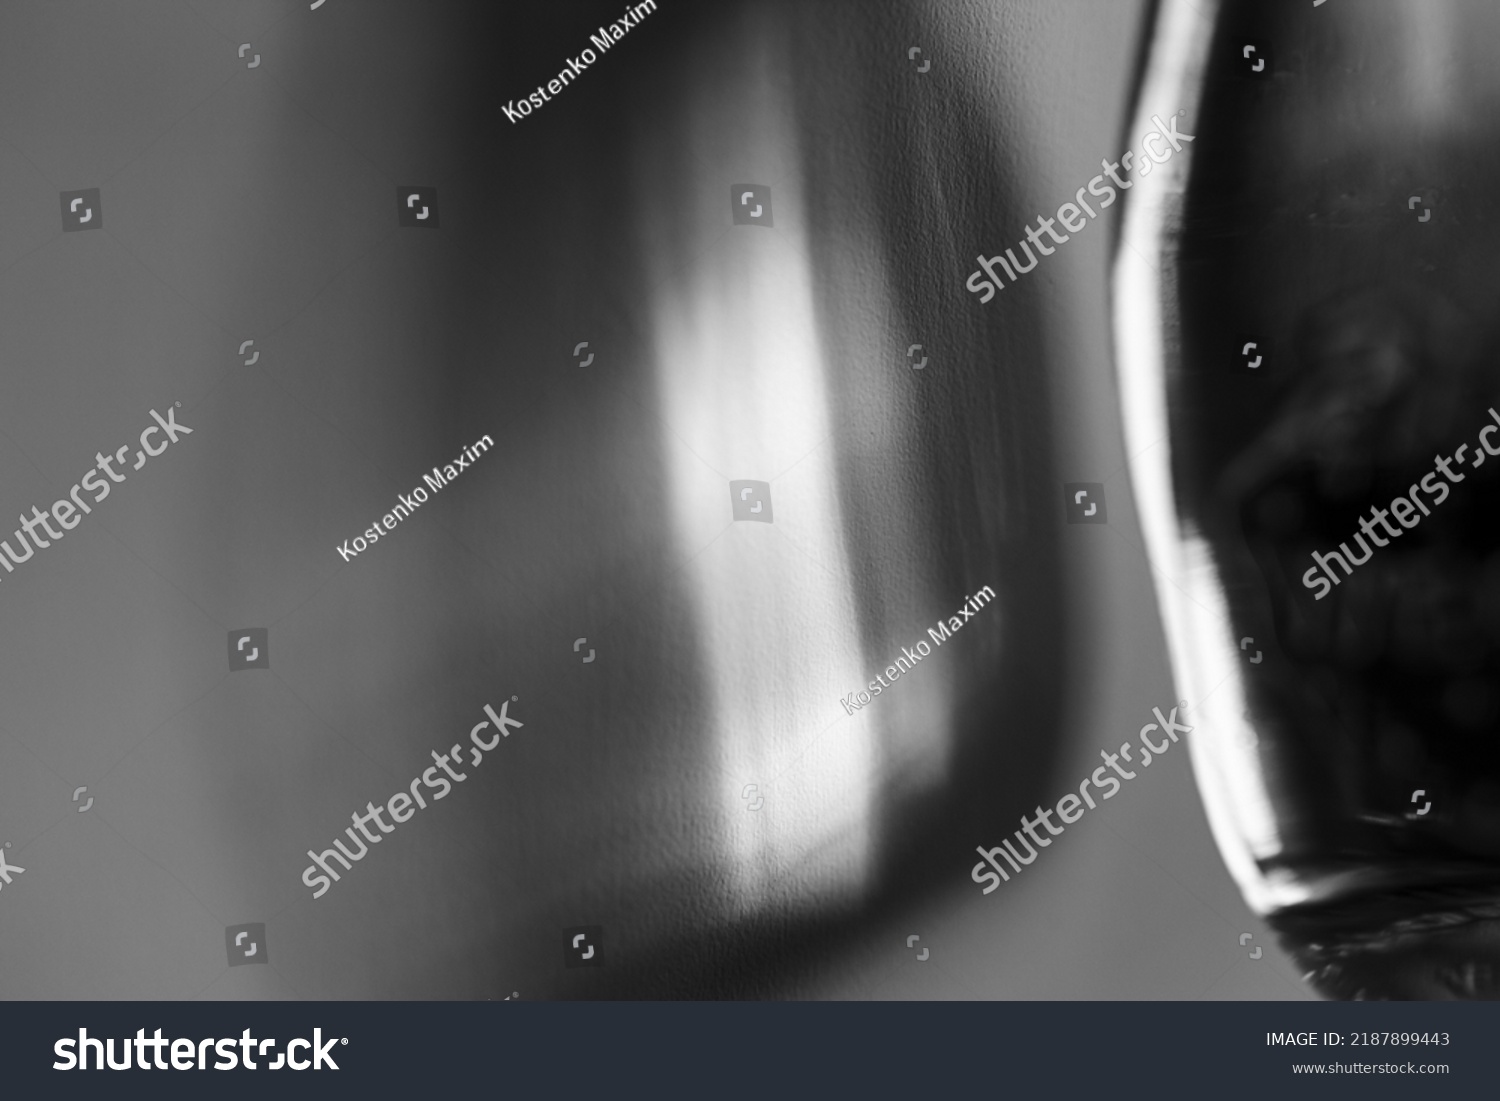 Glass bottle cast beautiful shadow and caustic effect as light passes through a glass. Black and white photo. Abstract background #2187899443